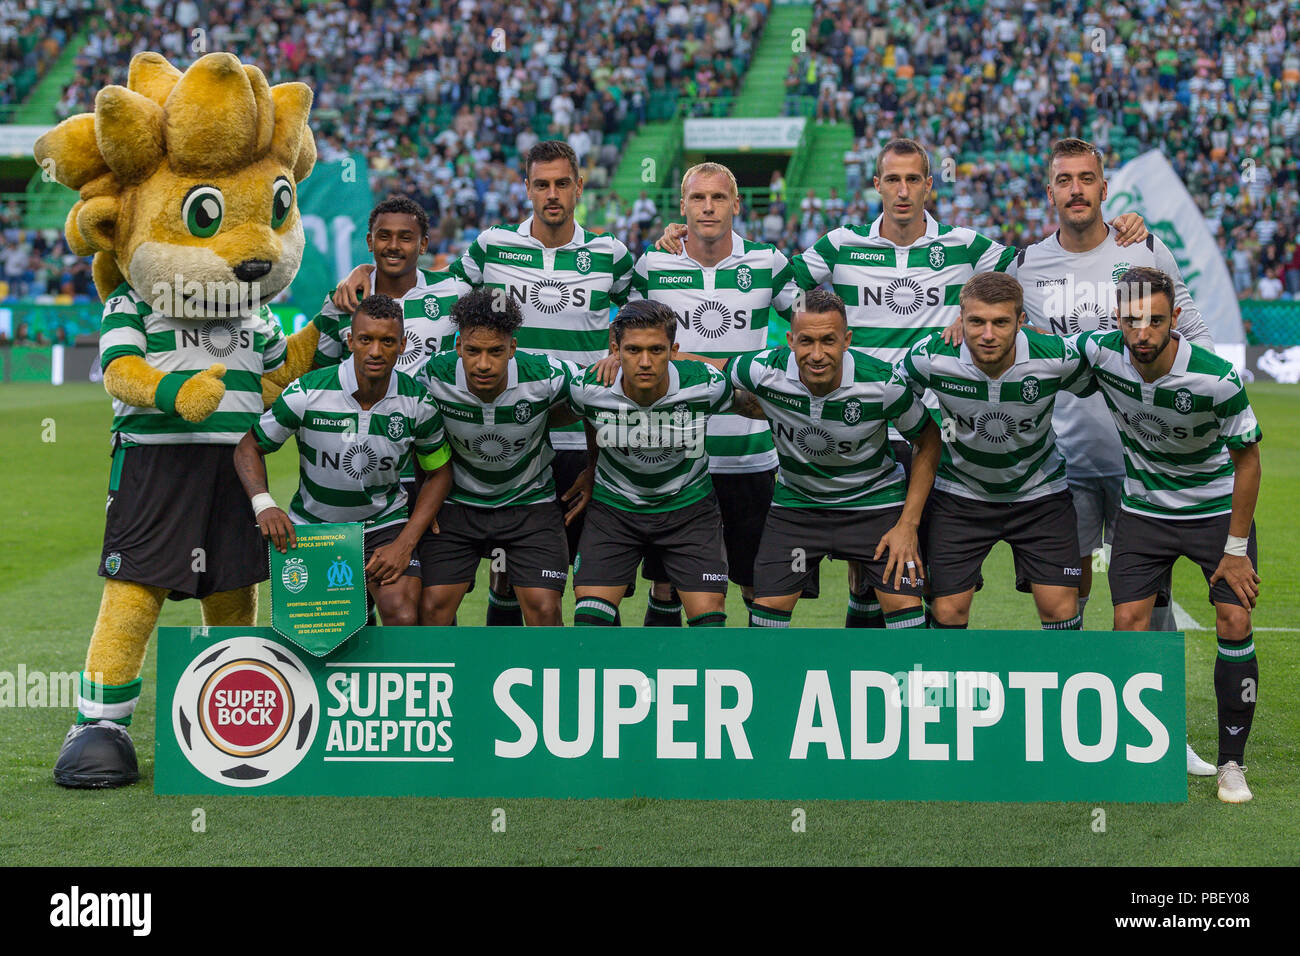 July 28, 2018. Lisbon, Portugal. Sporting's starting team for action during the game Sporting CP v Olympique de Marseille © Alexandre de Sousa/Alamy Live News Stock Photo